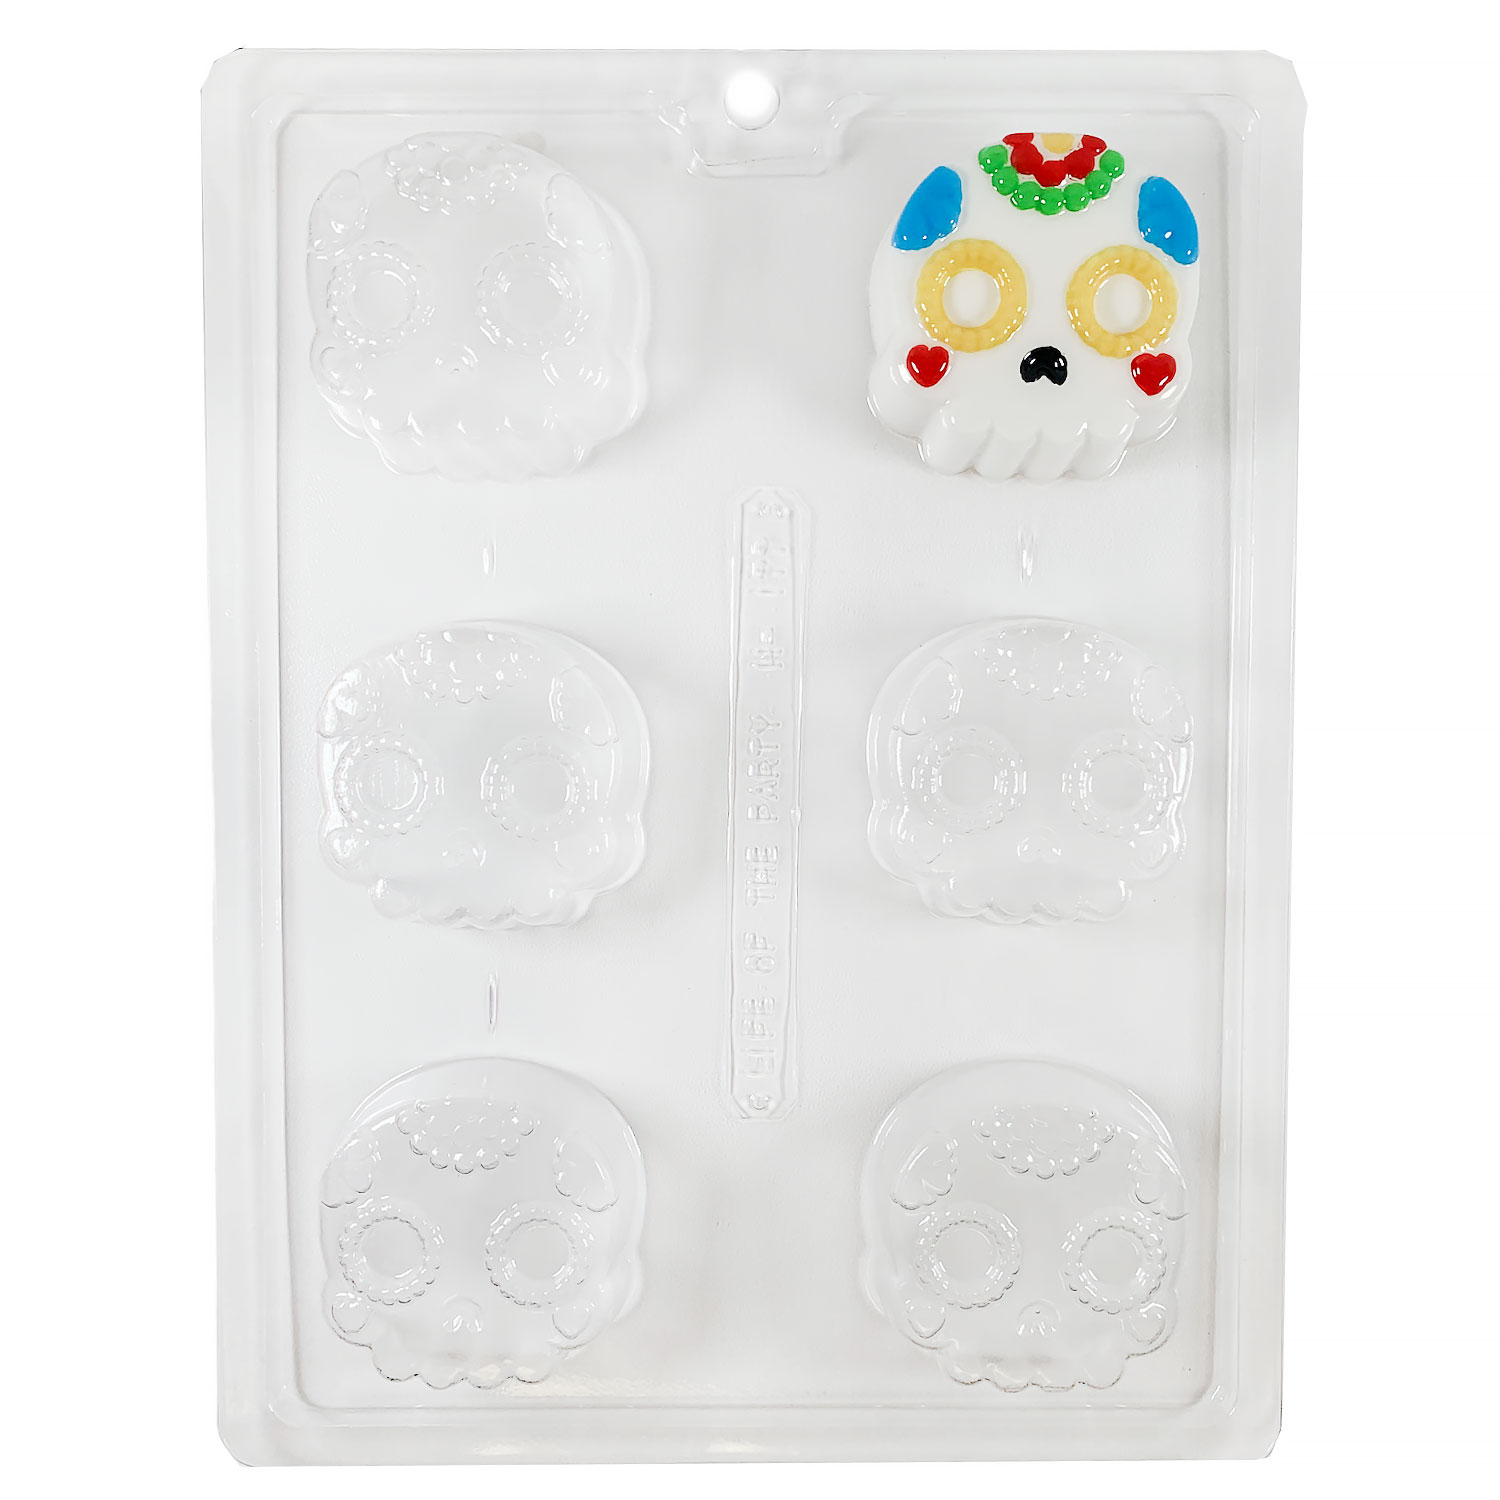 Day of the Dead Sandwich Cookie Chocolate Mold